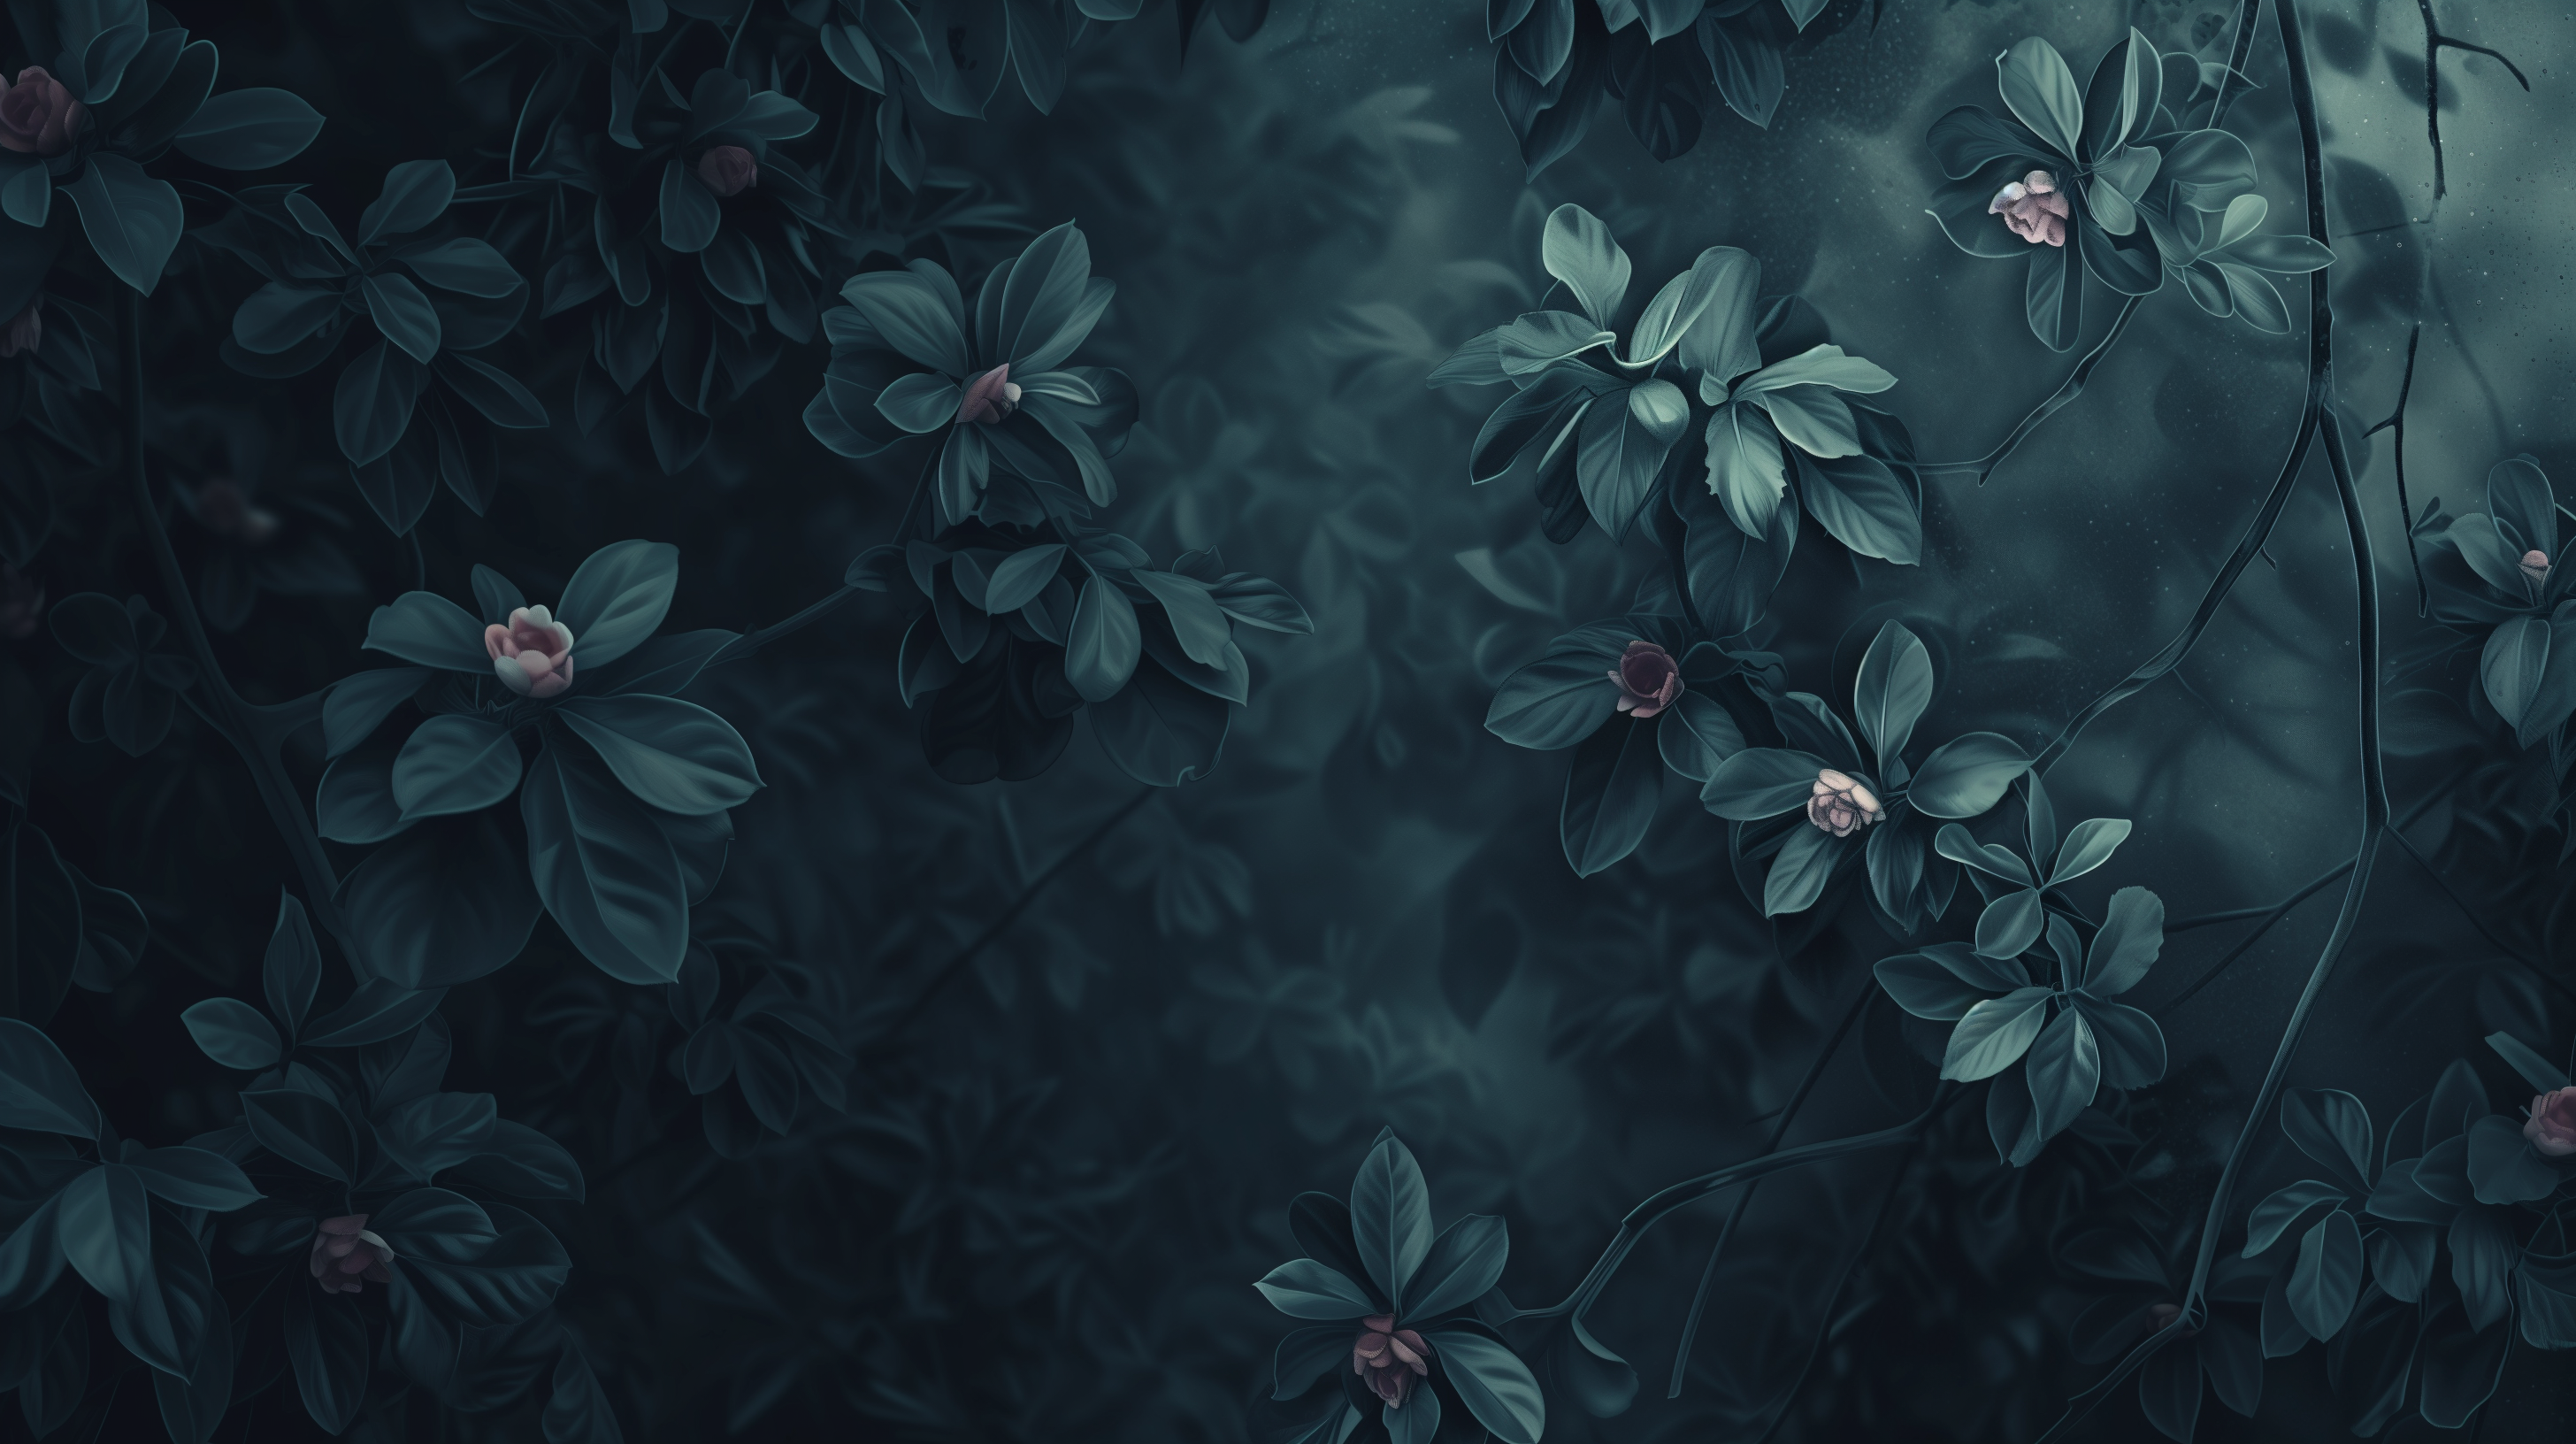 Dark floral aesthetic HD wallpaper with black shades and subtle flower highlights for desktop background.